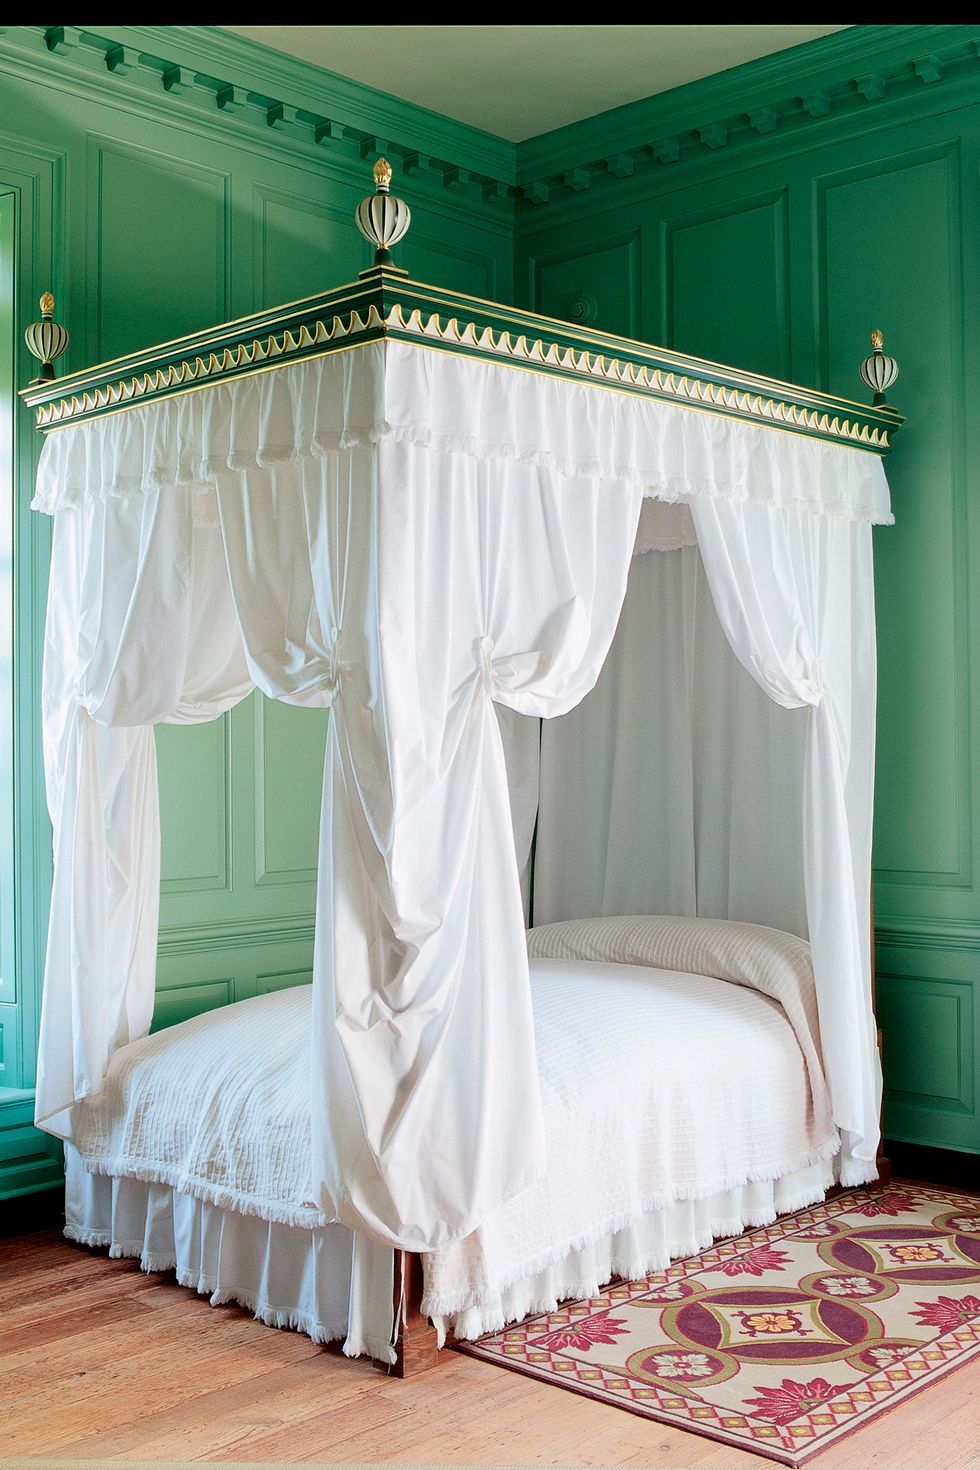 green bedroom with canopy